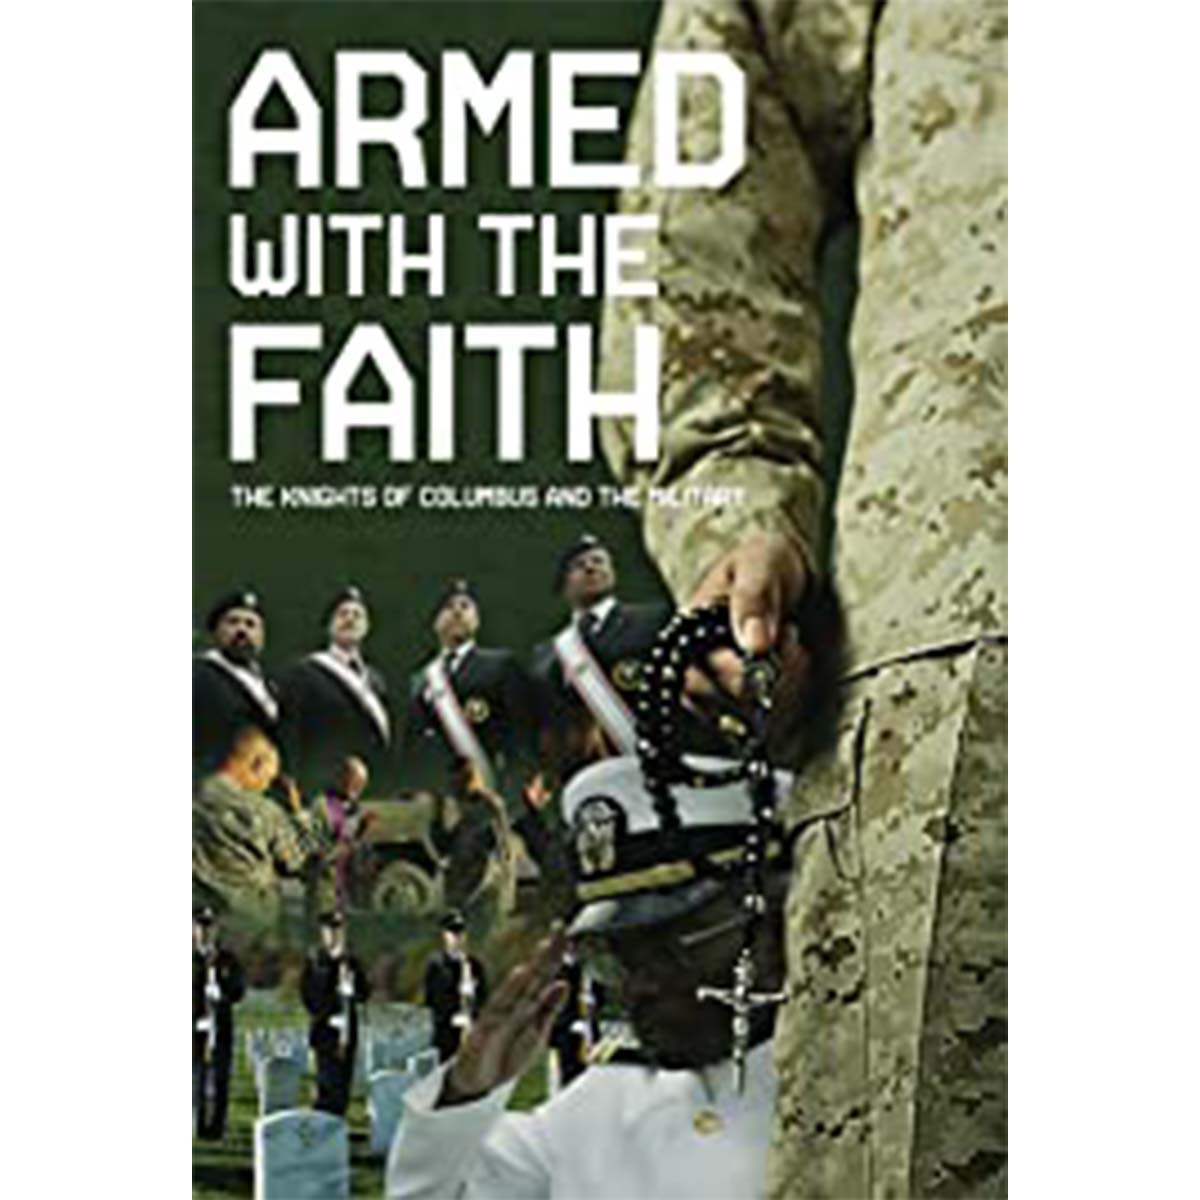 Armed with the Faith: Knights of Columbus Military Documentary DVD